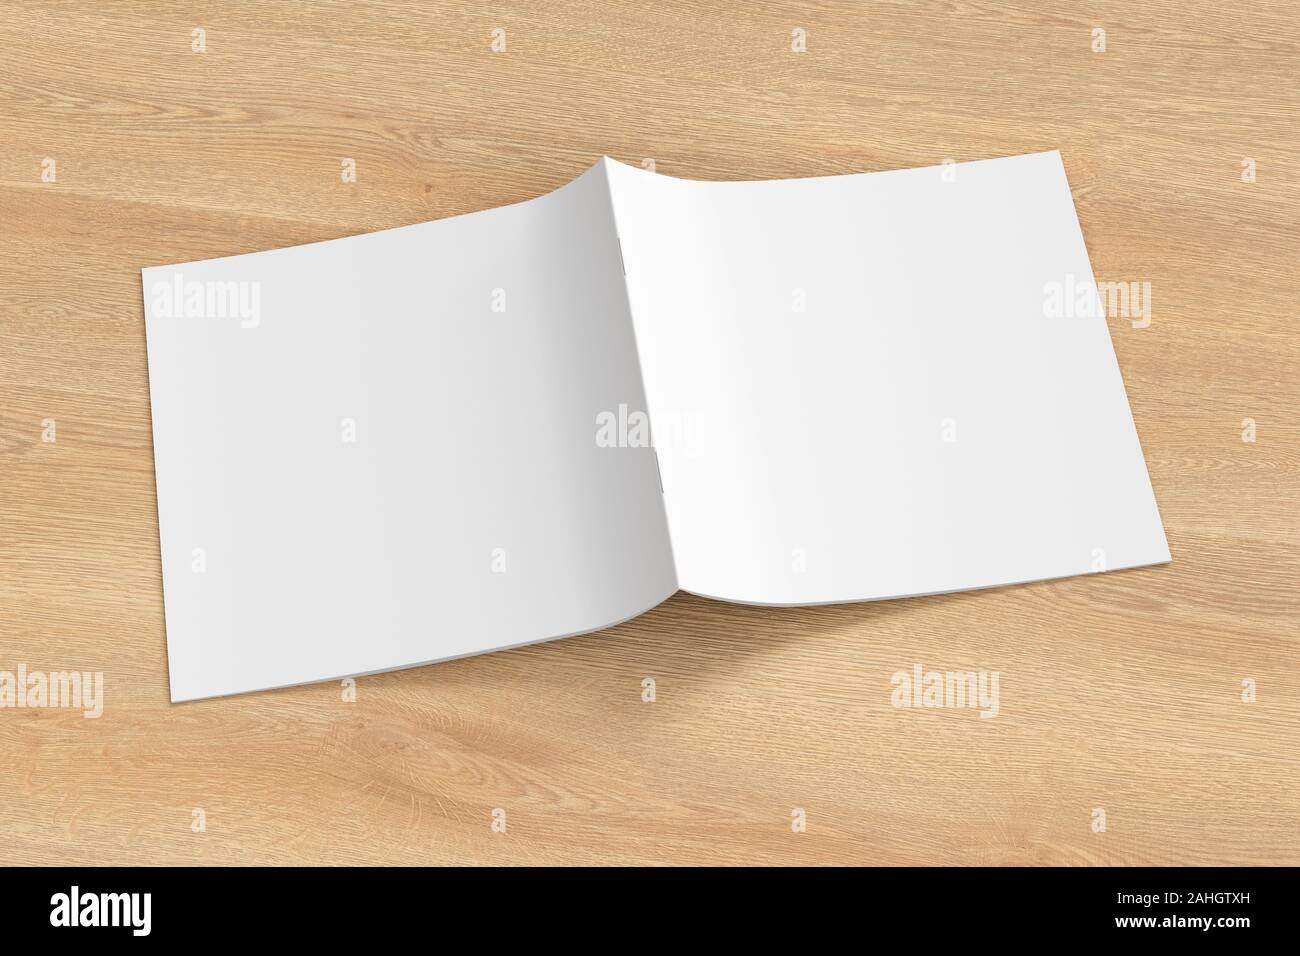 Square brochure or booklet cover mock up on wooden background. Brochure is open and upside down. Isolated with clipping path around brochure. Side vie Stock Photo